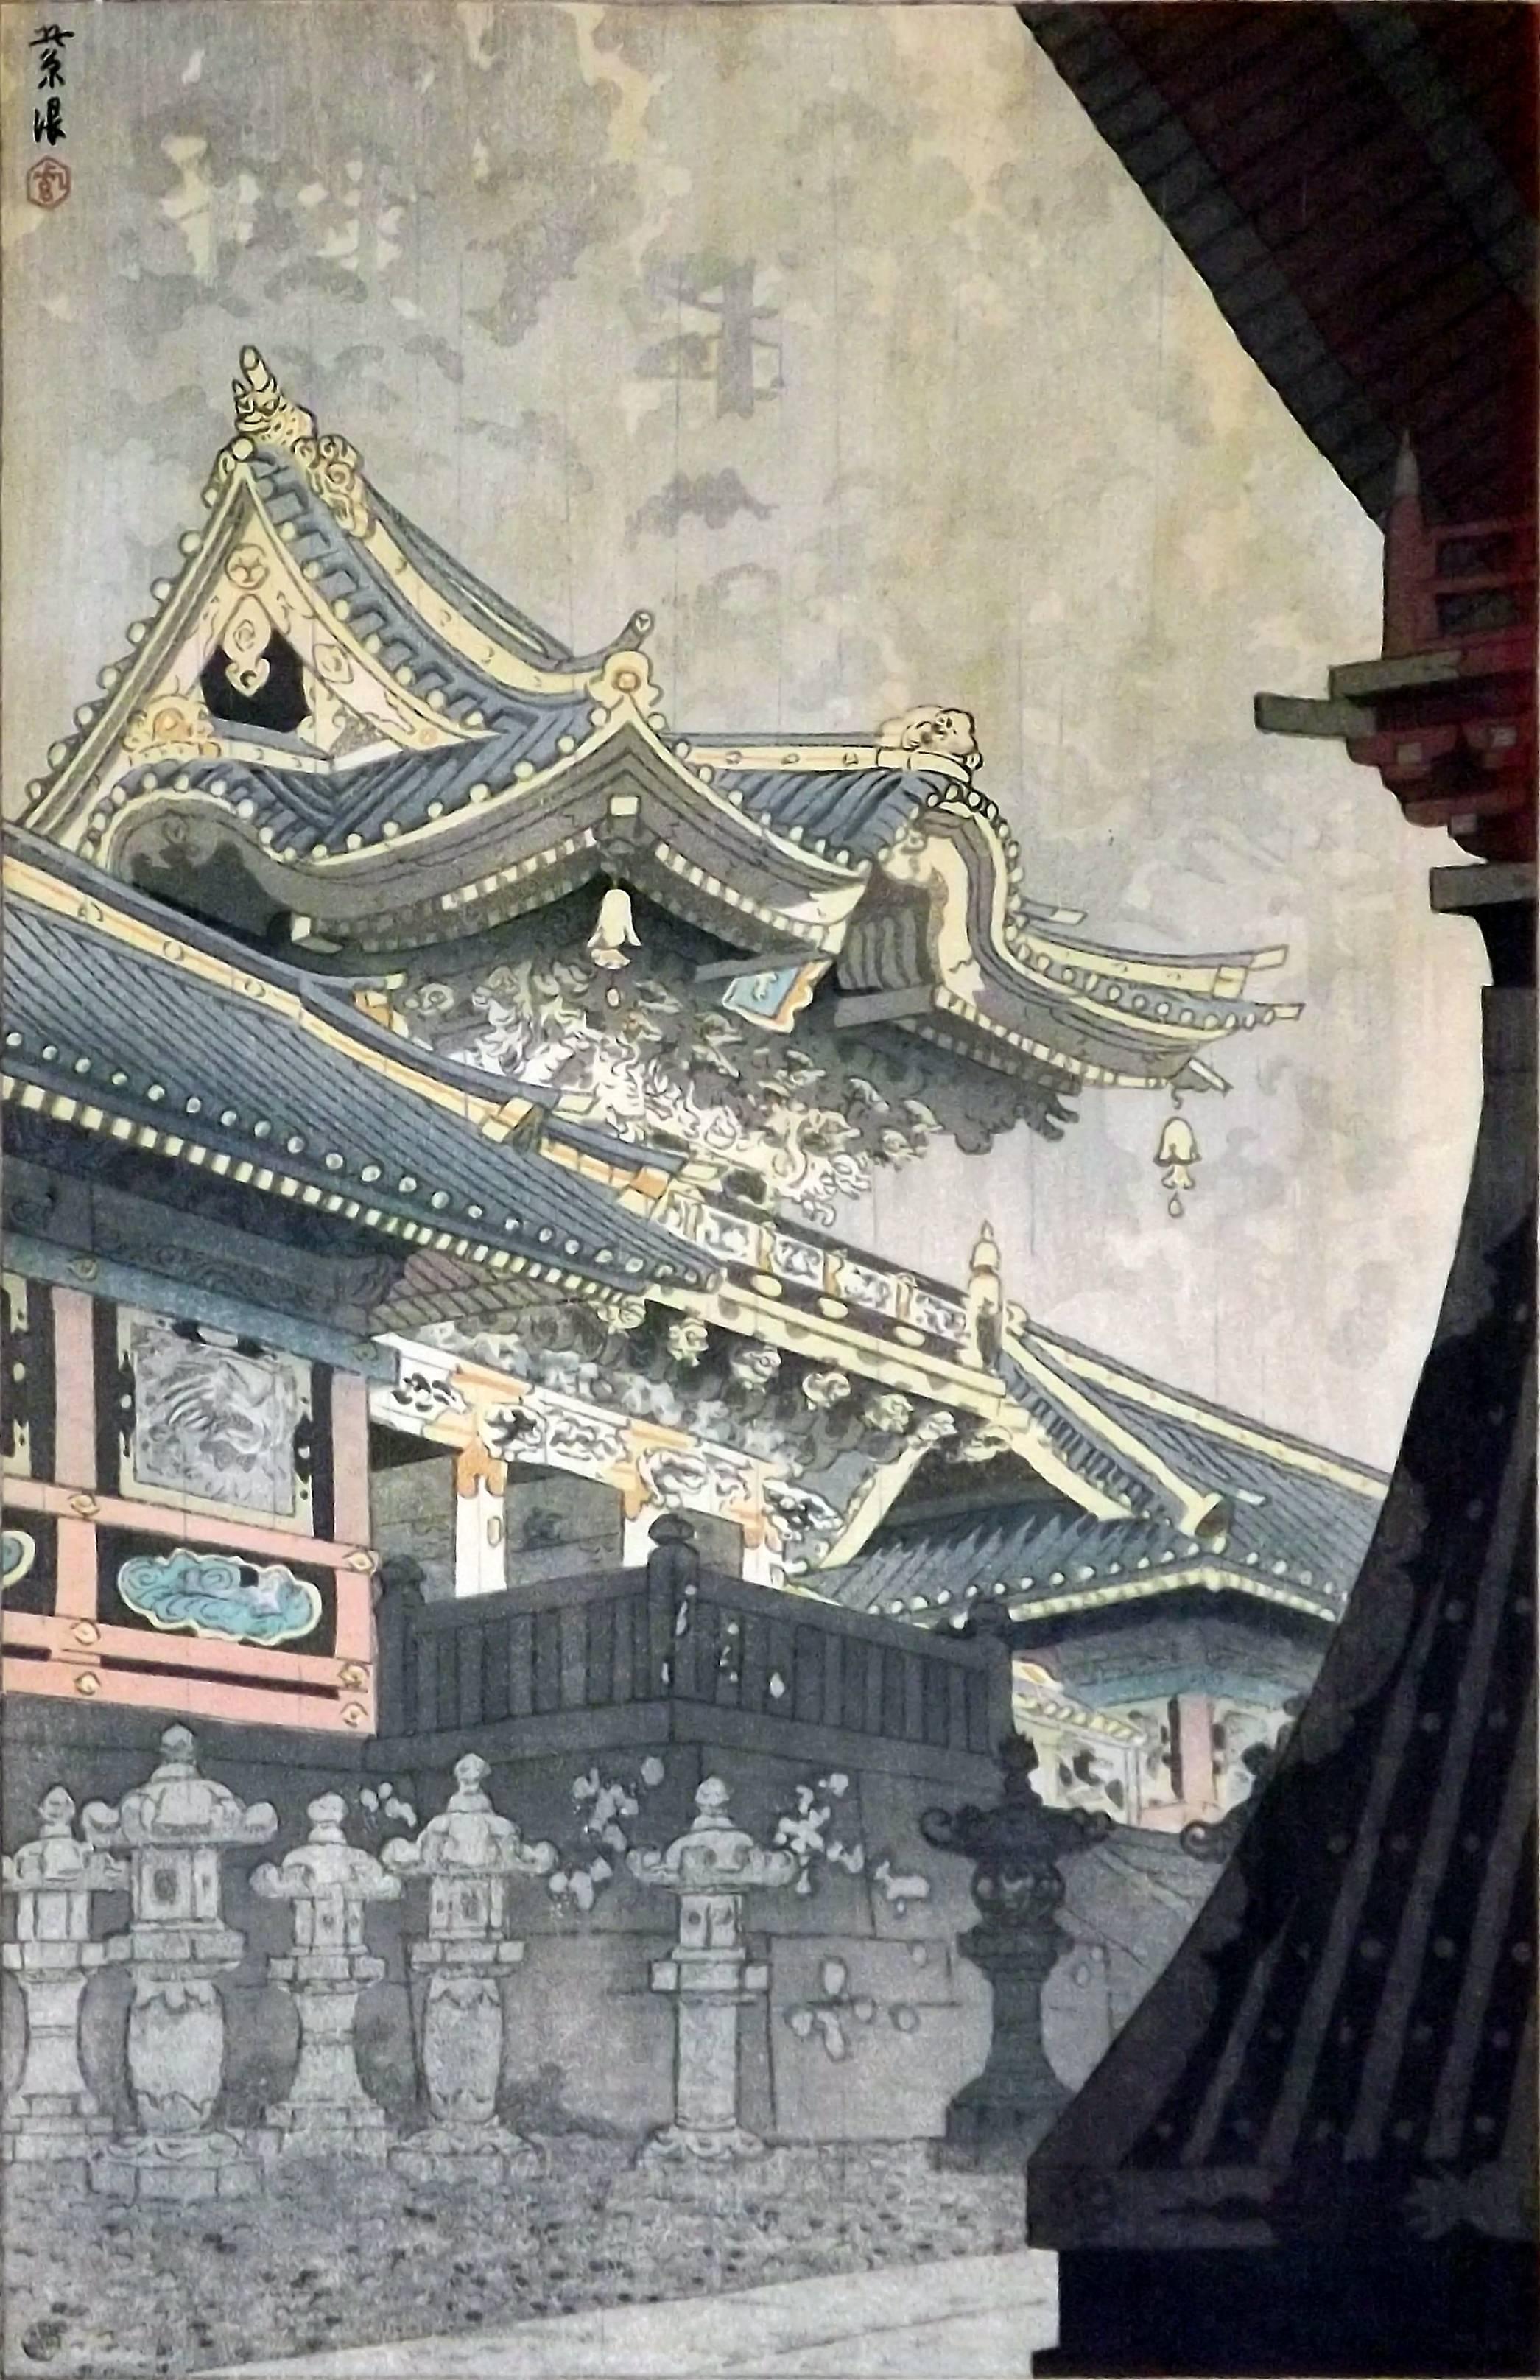 A very nice woodblock print of Yomeimon gate by Japanese artist Kasamatsu Shiro (1898-1991). A light drizzle falls on the stone courtyard and wispy trees are seen off in the distance. Unframed, image size is 14 1/4 inches tall by 9 1/2 inches wide.